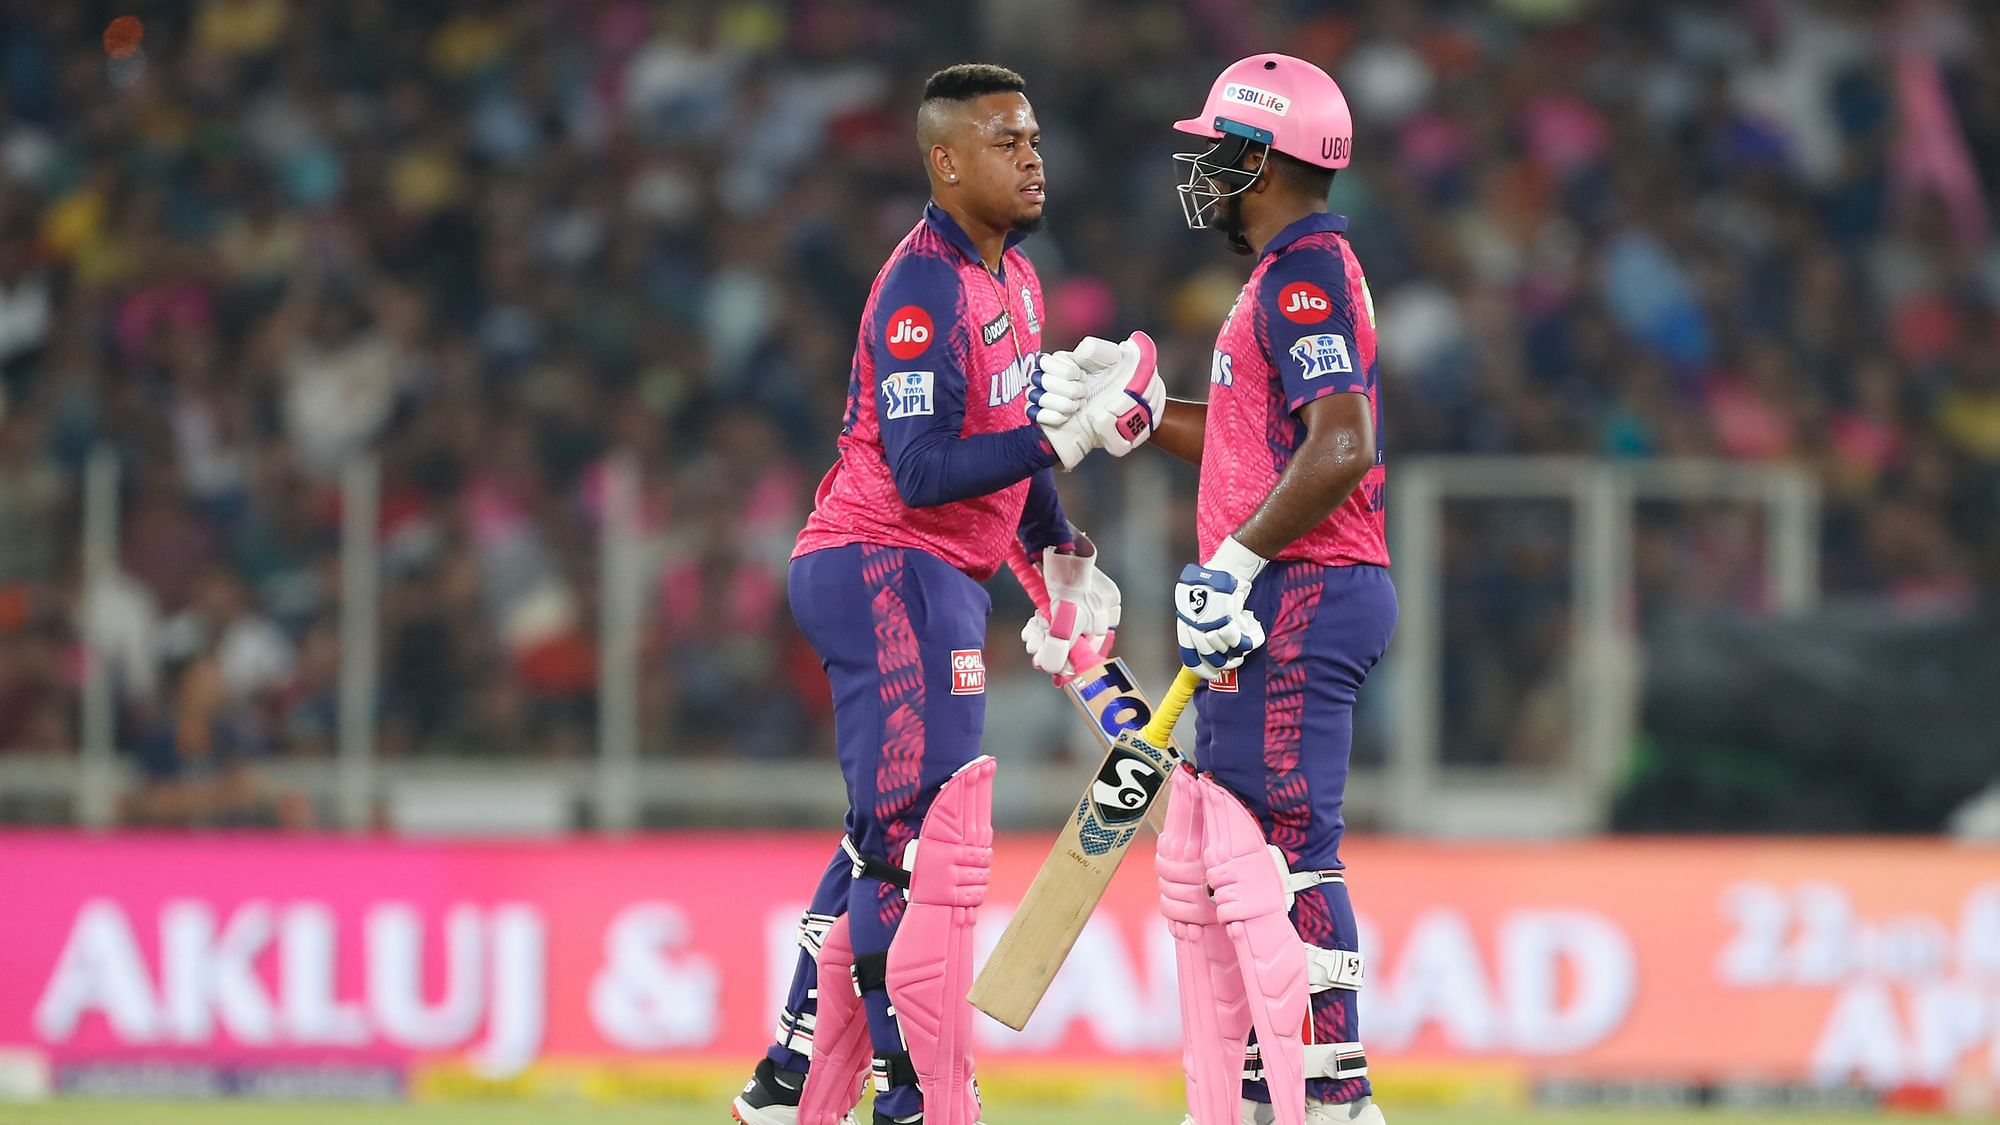 <div class="paragraphs"><p>IPL 2023: Rajasthan Royals defeated Gujarat Titans by 3 wickets to maintain the top spot in IPL 2023 points table.</p></div>